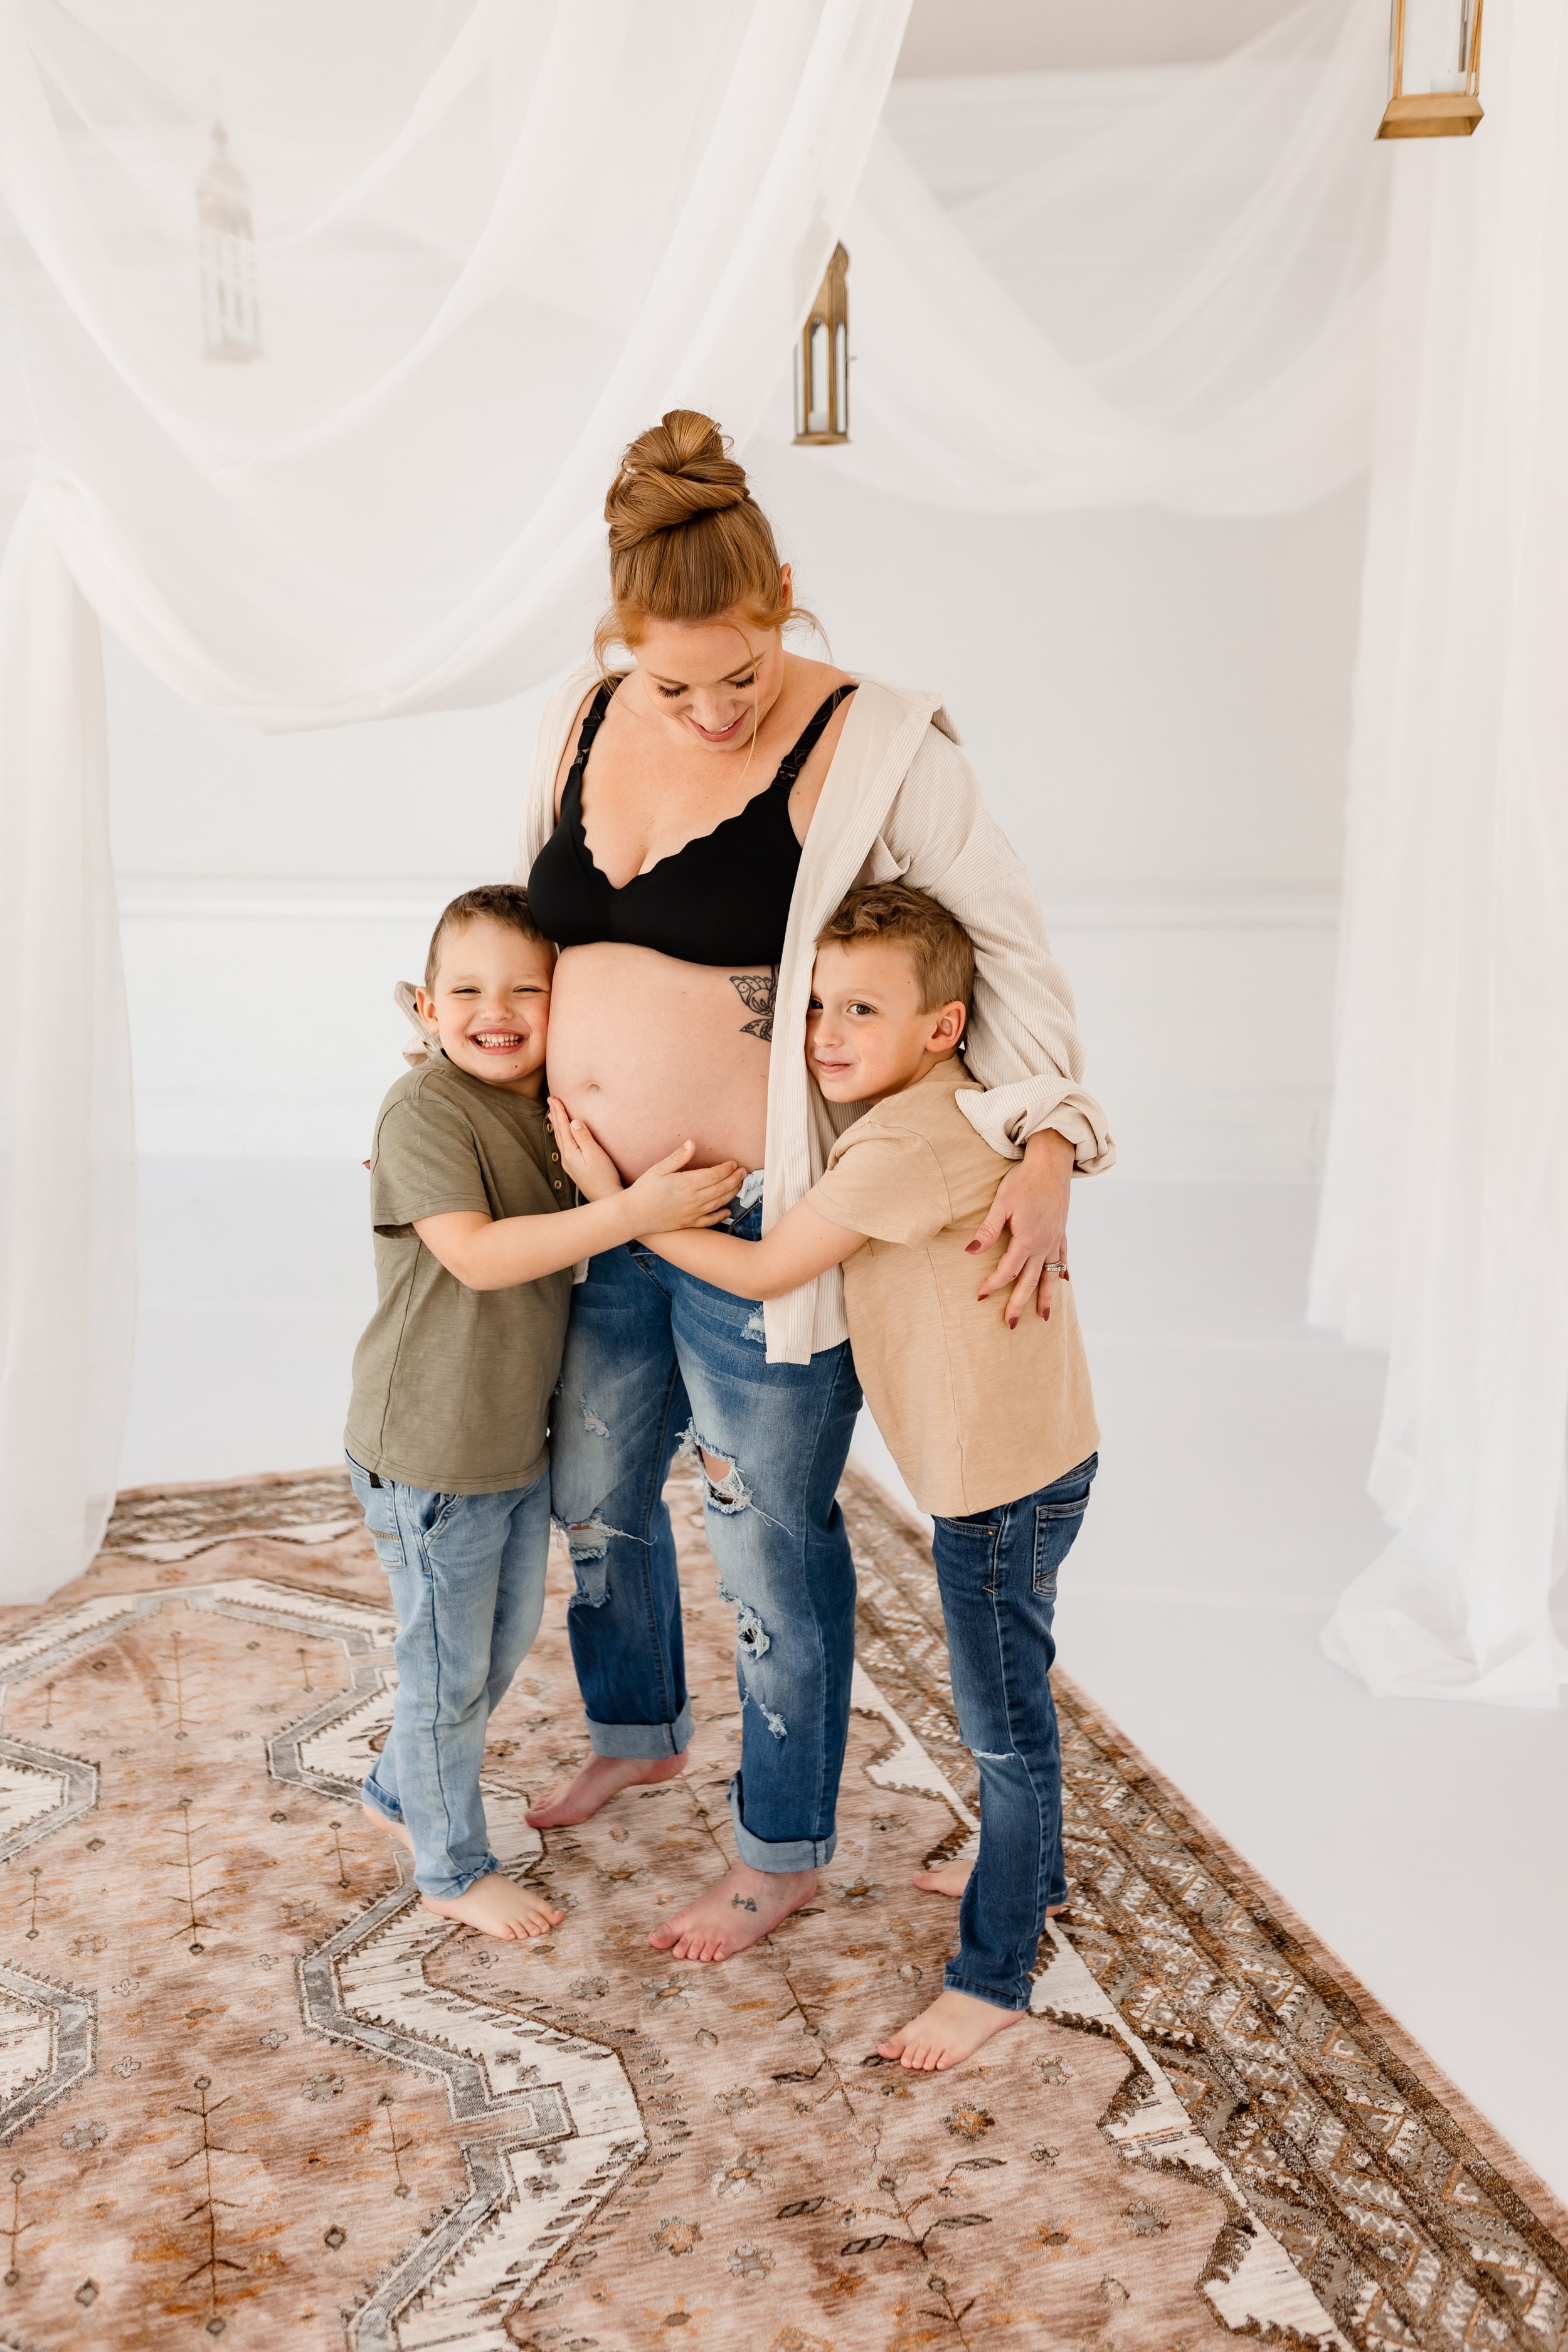 Kelly Anne Photography NH Lifestyle Photographer Studio Maternity Family Session Final Gallery-2.jpg